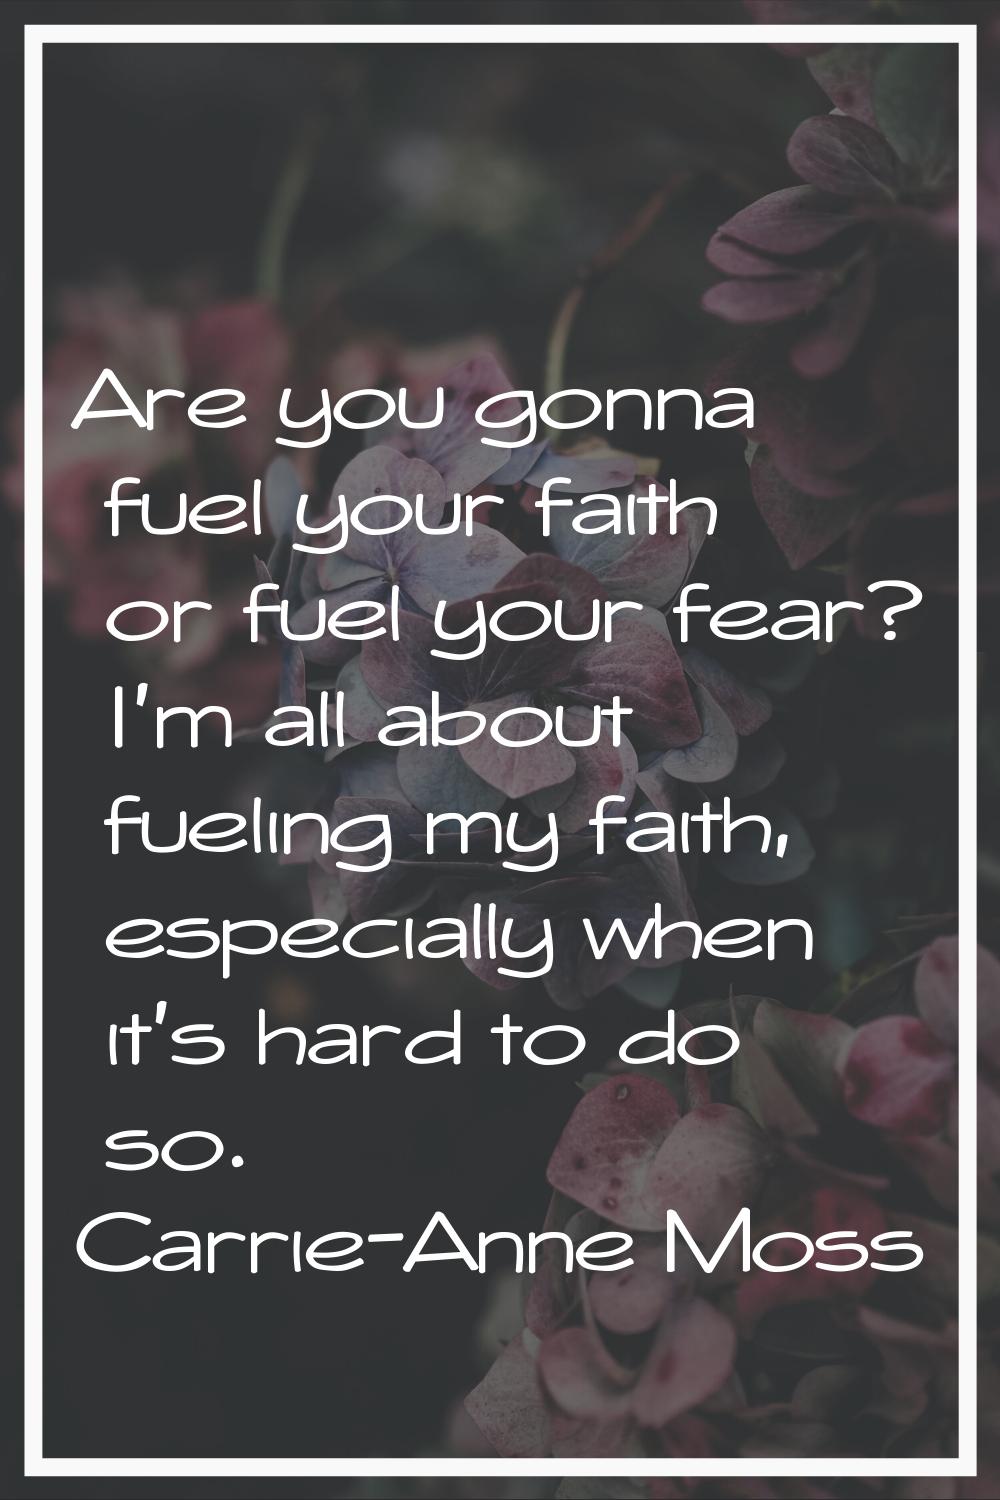 Are you gonna fuel your faith or fuel your fear? I'm all about fueling my faith, especially when it